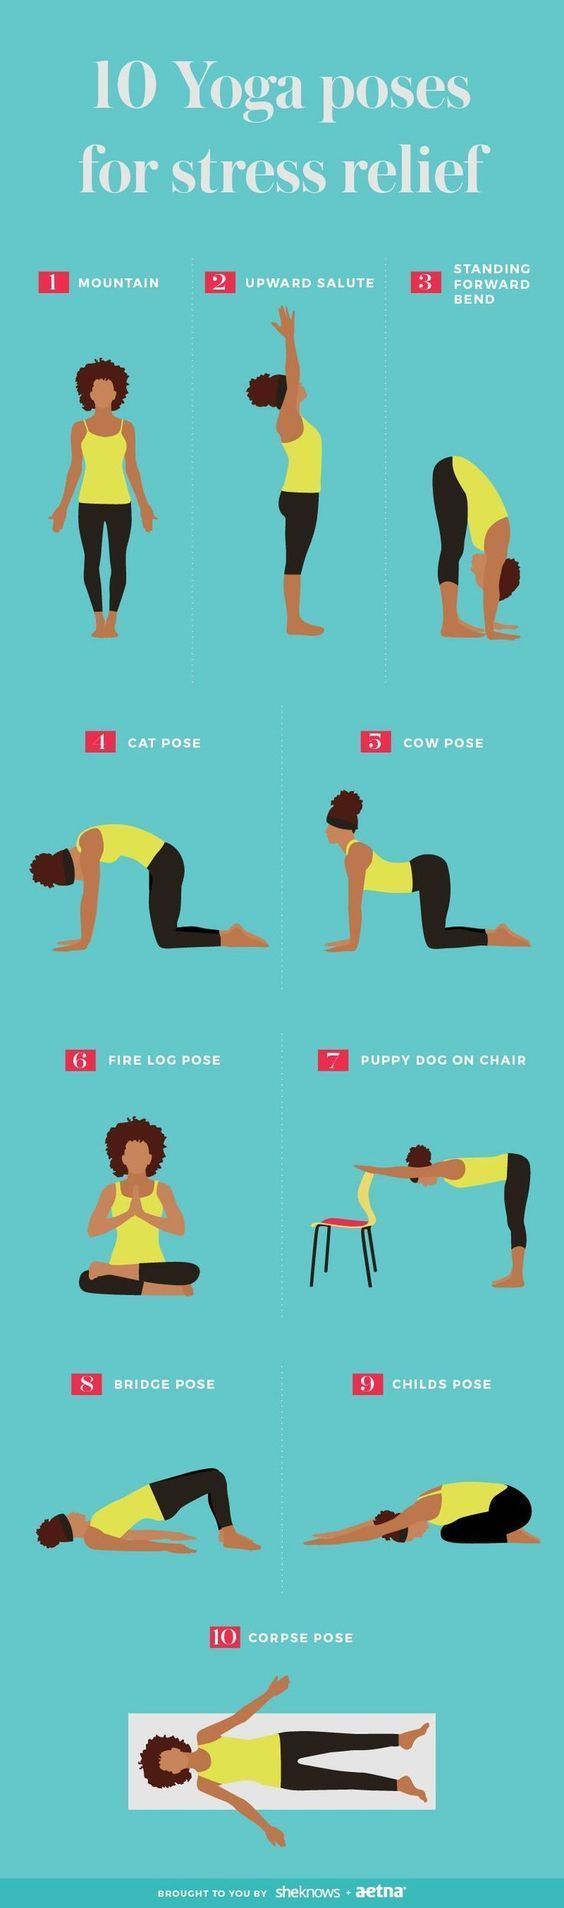 The perfect yoga series for work-related stress relief